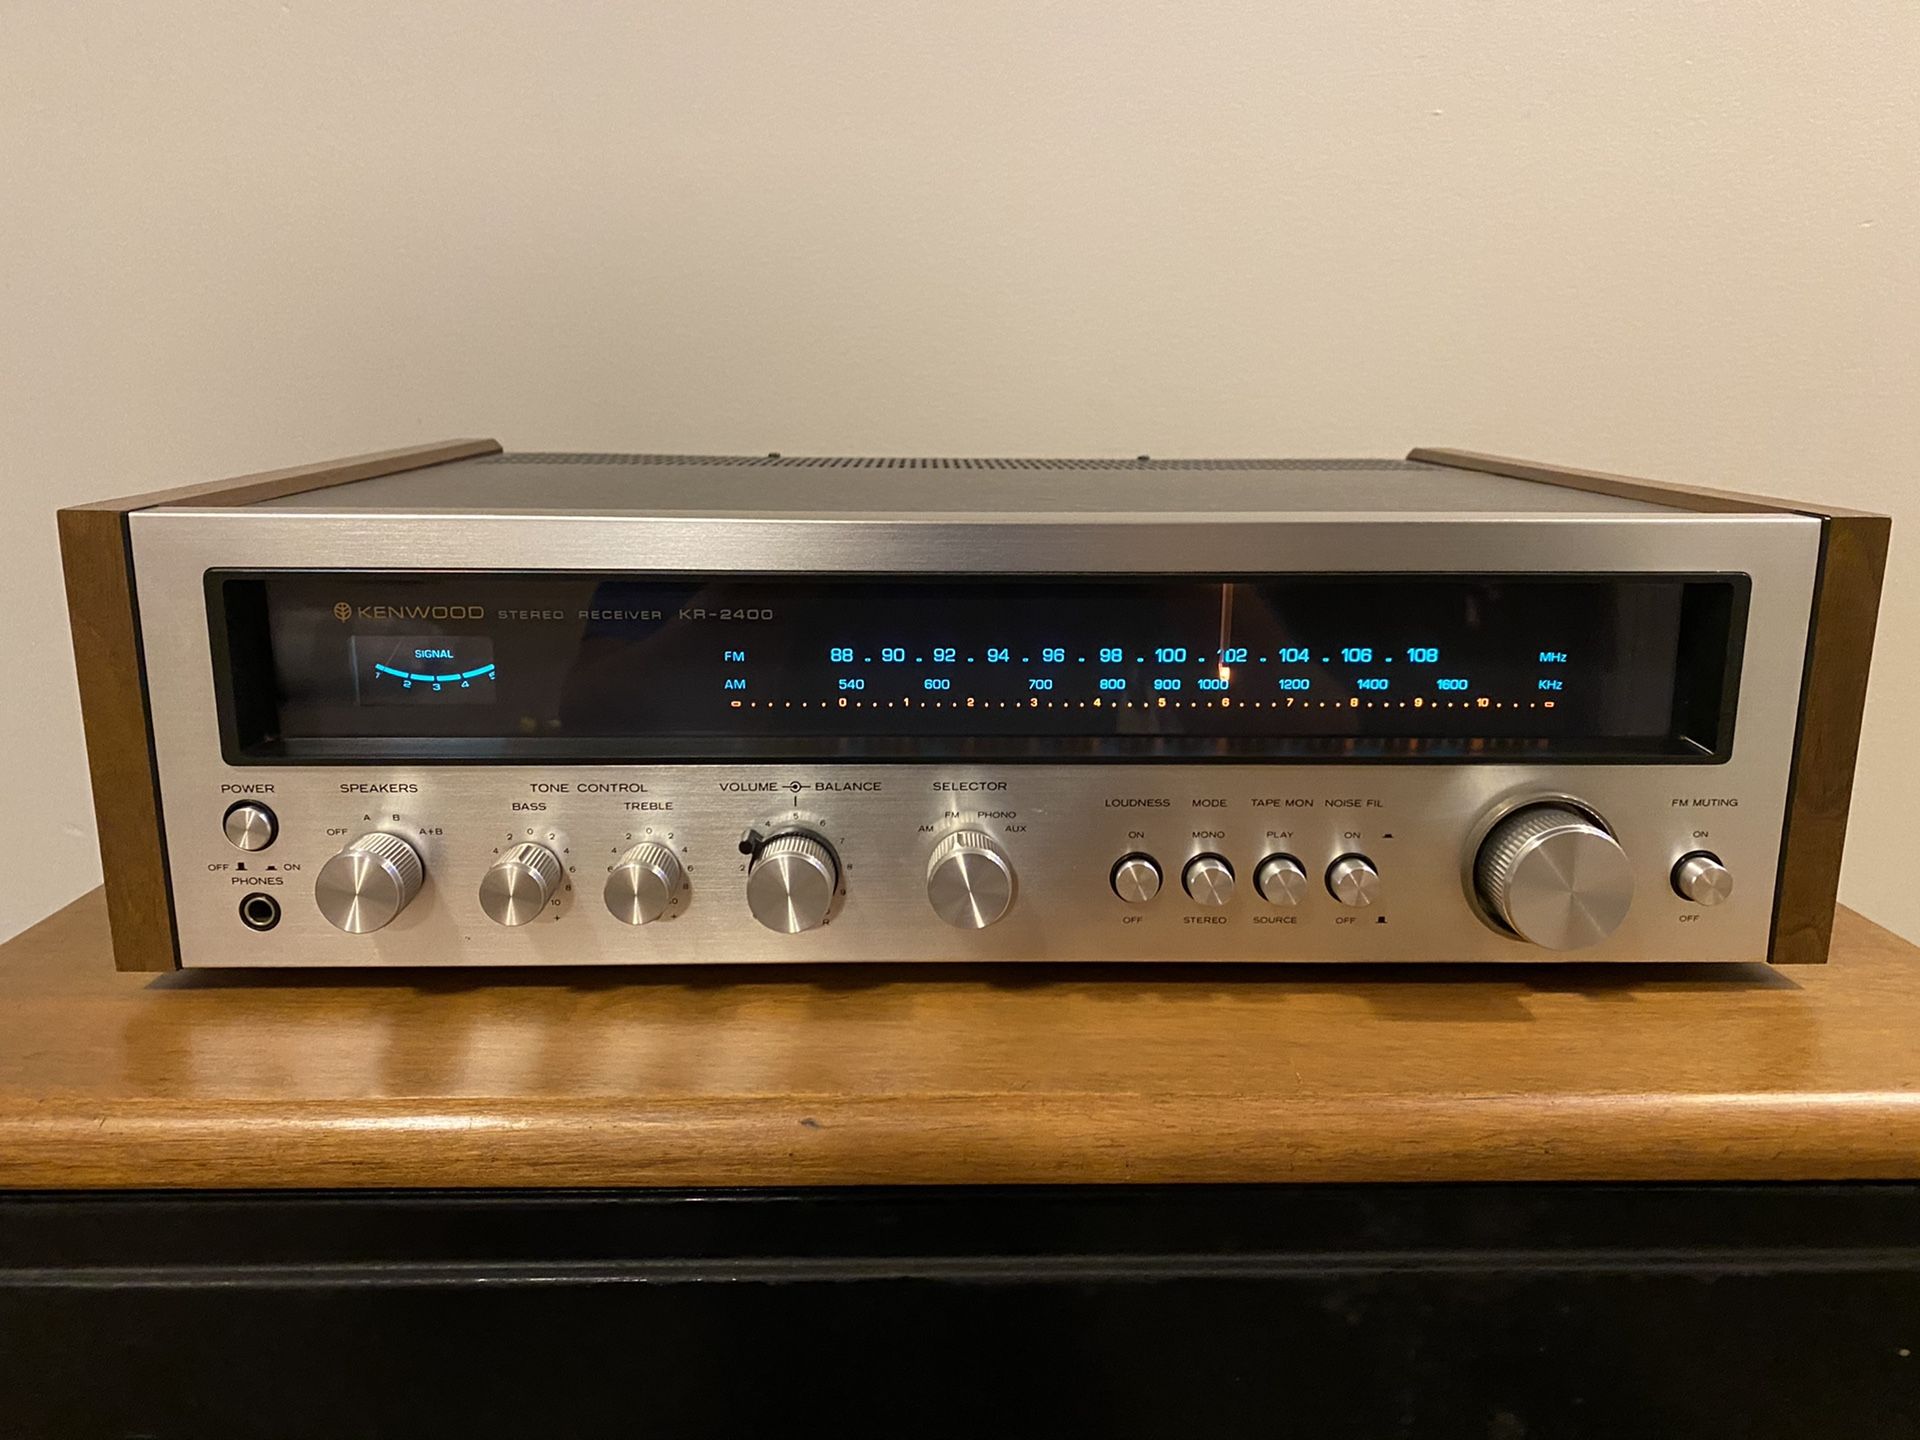 Kenwood solid state receiver